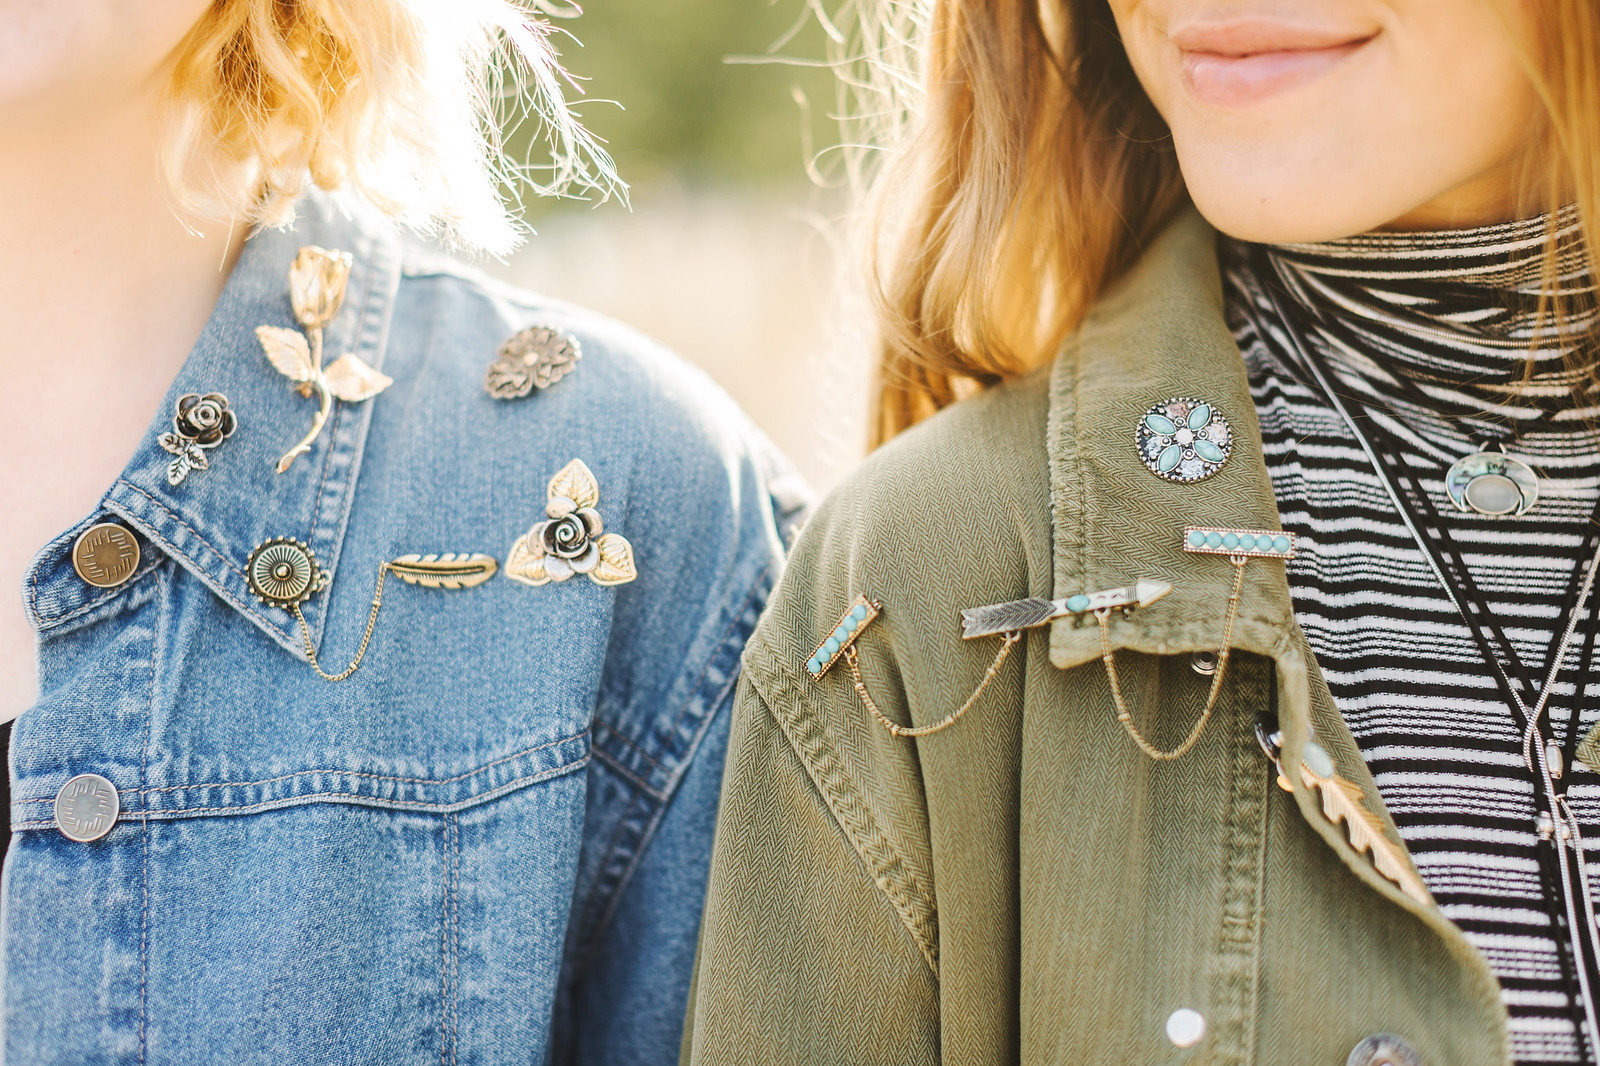 An updated and elevated take on the pin trend. // Photo for Free People by Lena Mirisola on juliettelaura.blogspot.com